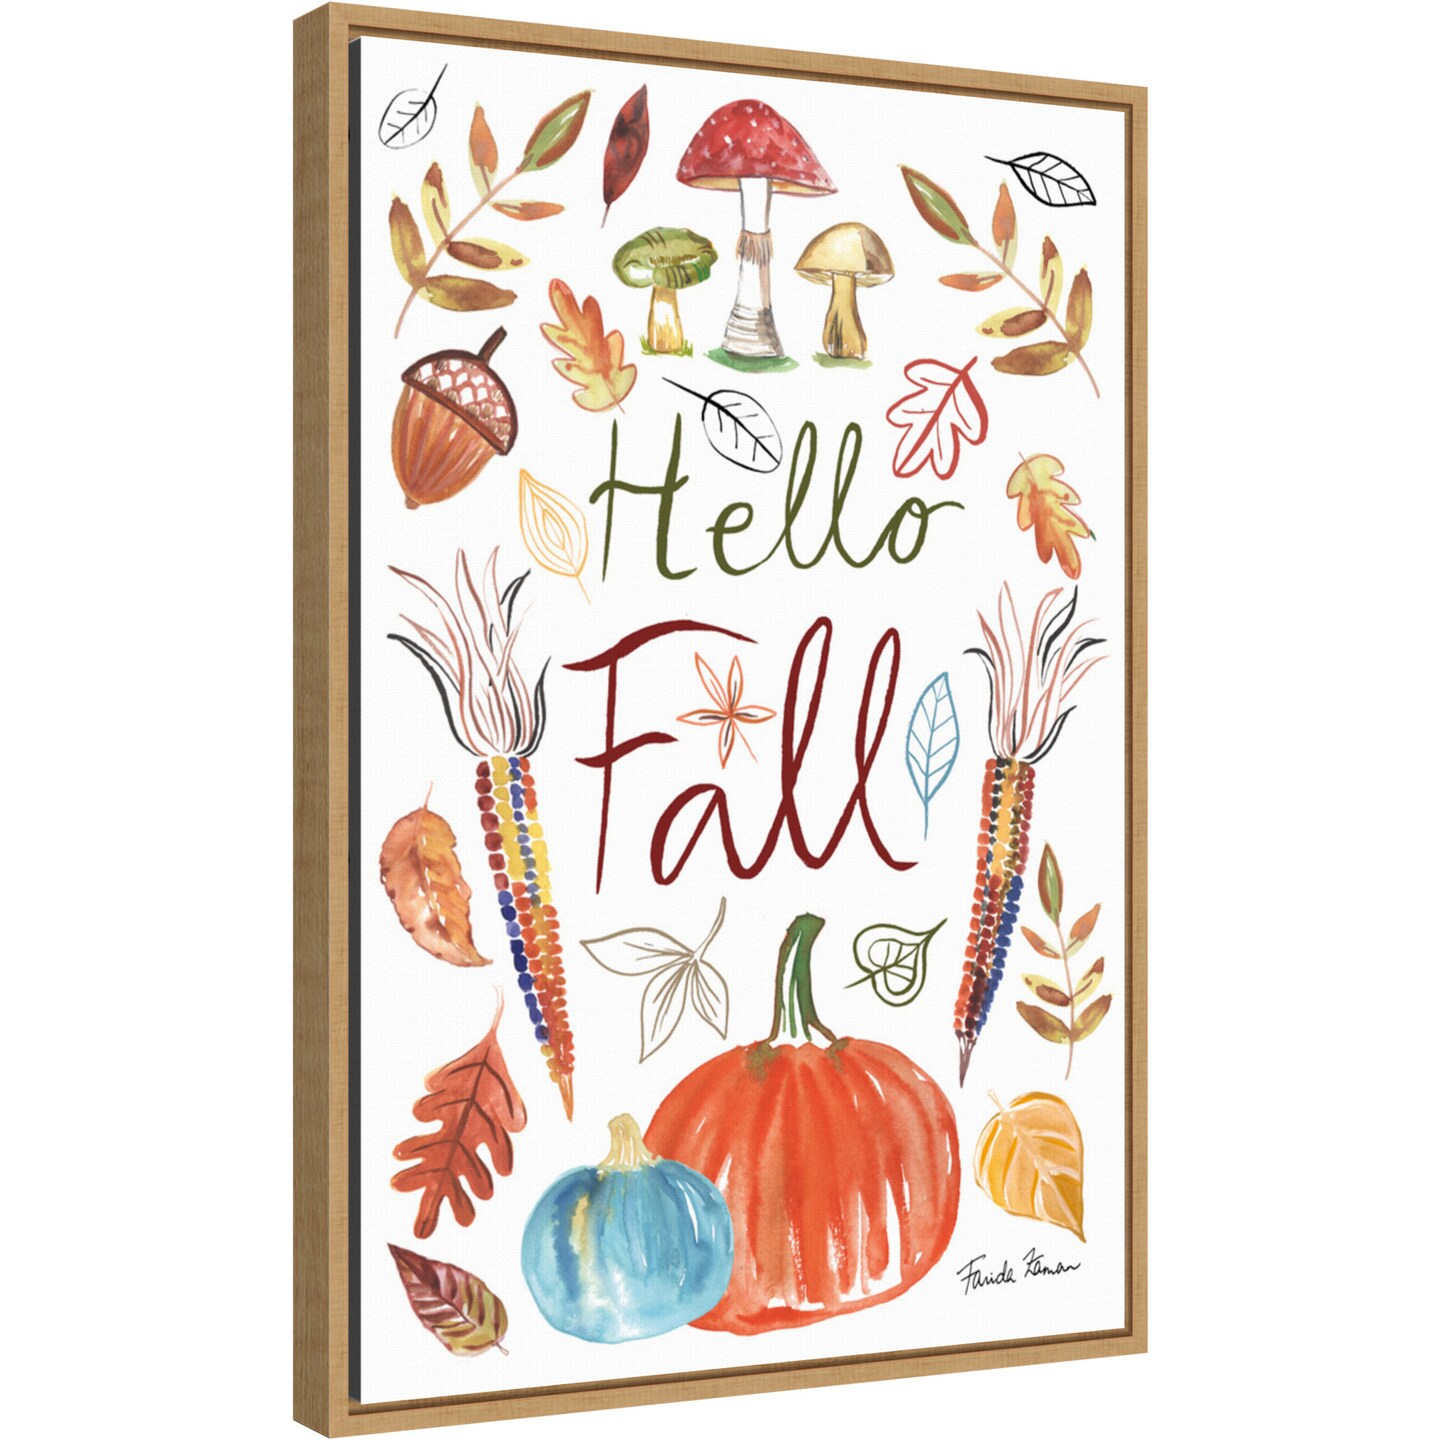 Hello Fall I by Farida Zaman 16-in. W x 23-in. H. Canvas Wall Art Print Framed in Natural